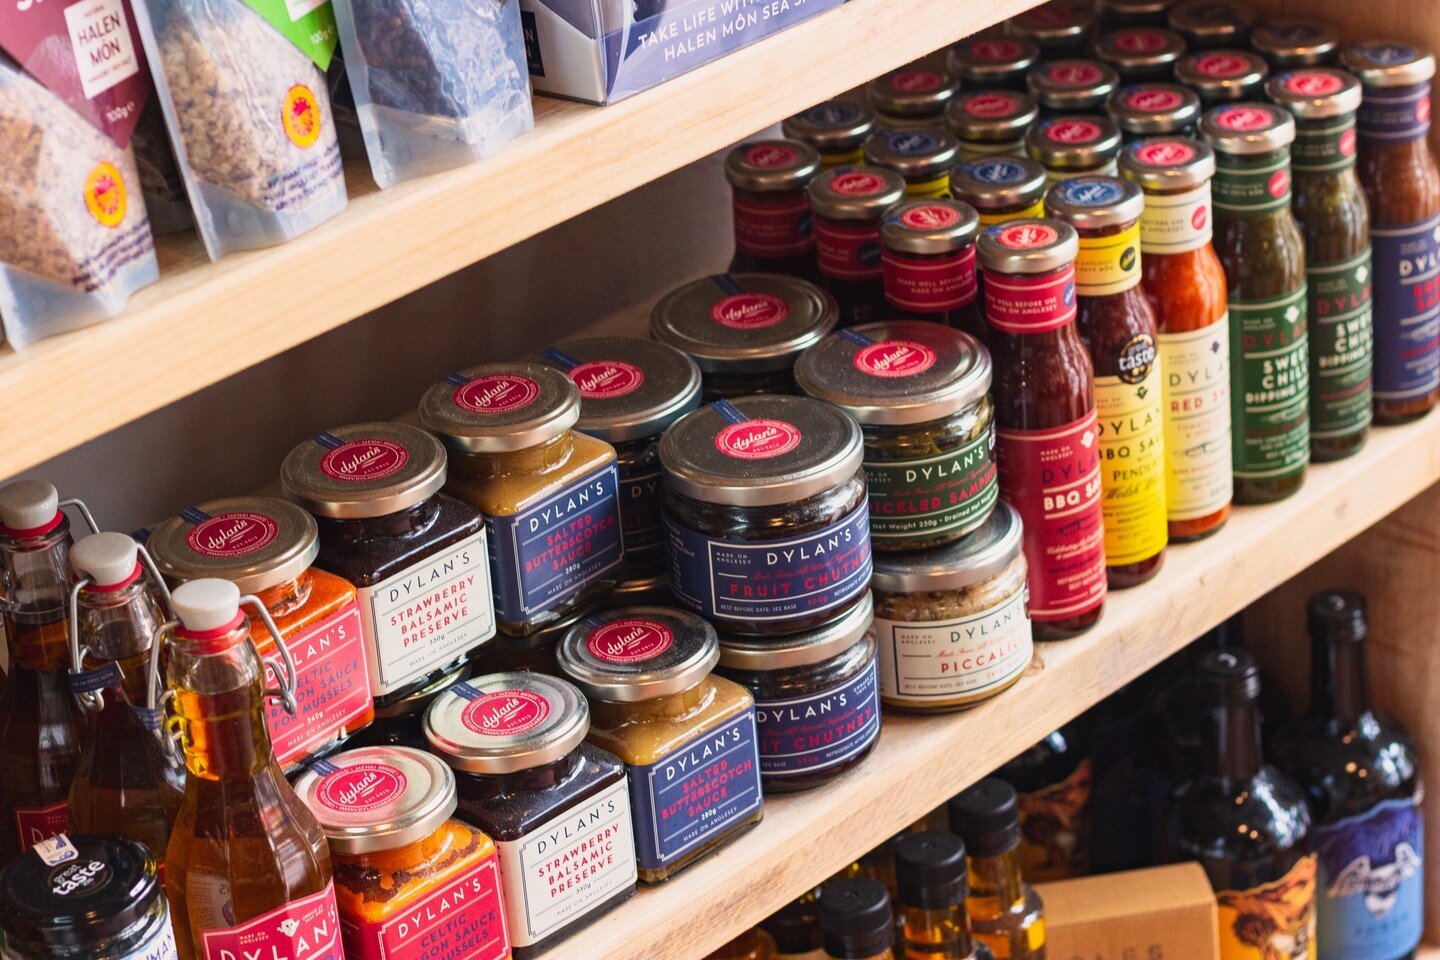 With December almost here and lots of us now thinking about festive gifts for our loved ones, it's a great time to check out our retail shelves in both Big and Little Prov 🎁

Buying for a foodie? We have plenty of tasty, locally produced treats. Gif